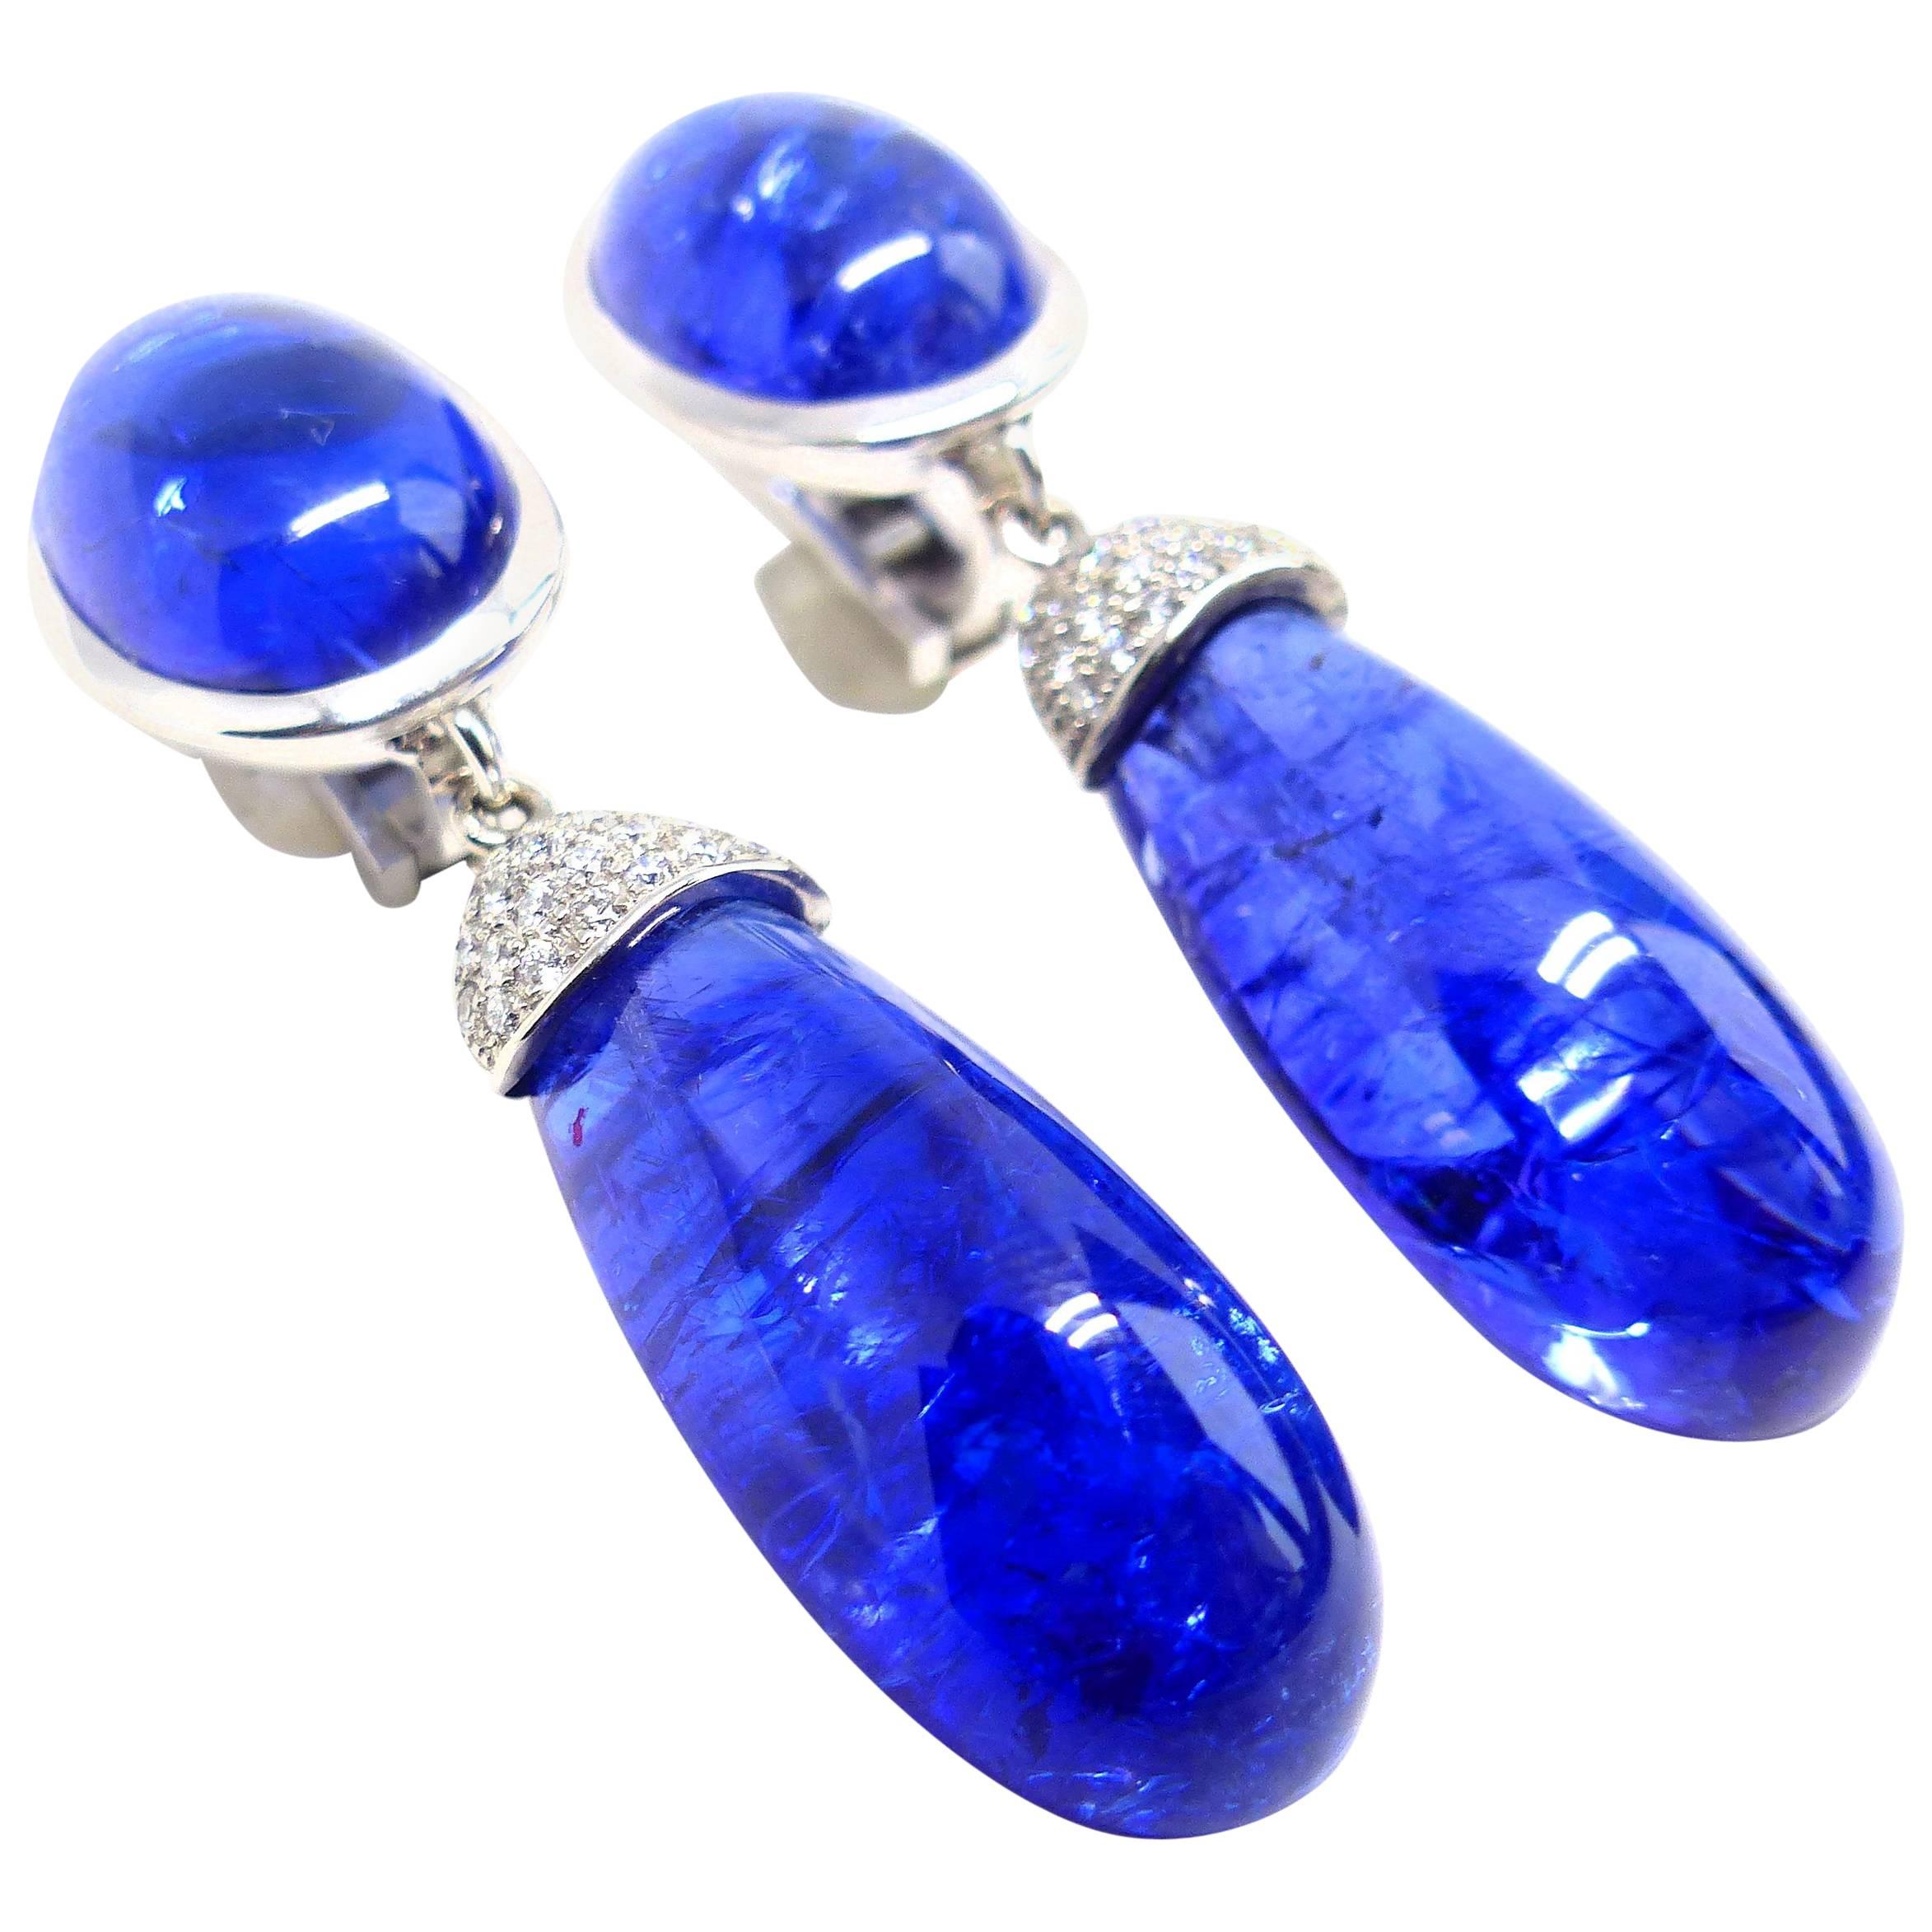 Thomas Leyser is renowned for his contemporary jewellery designs utilizing fine coloured gemstones and diamonds. 

These fine Tanzanites pair of earrings oval 16x12mm + pear 28,5x13,2mm (68.50cts. in total) is set in 18k white gold (14,62g) with 56